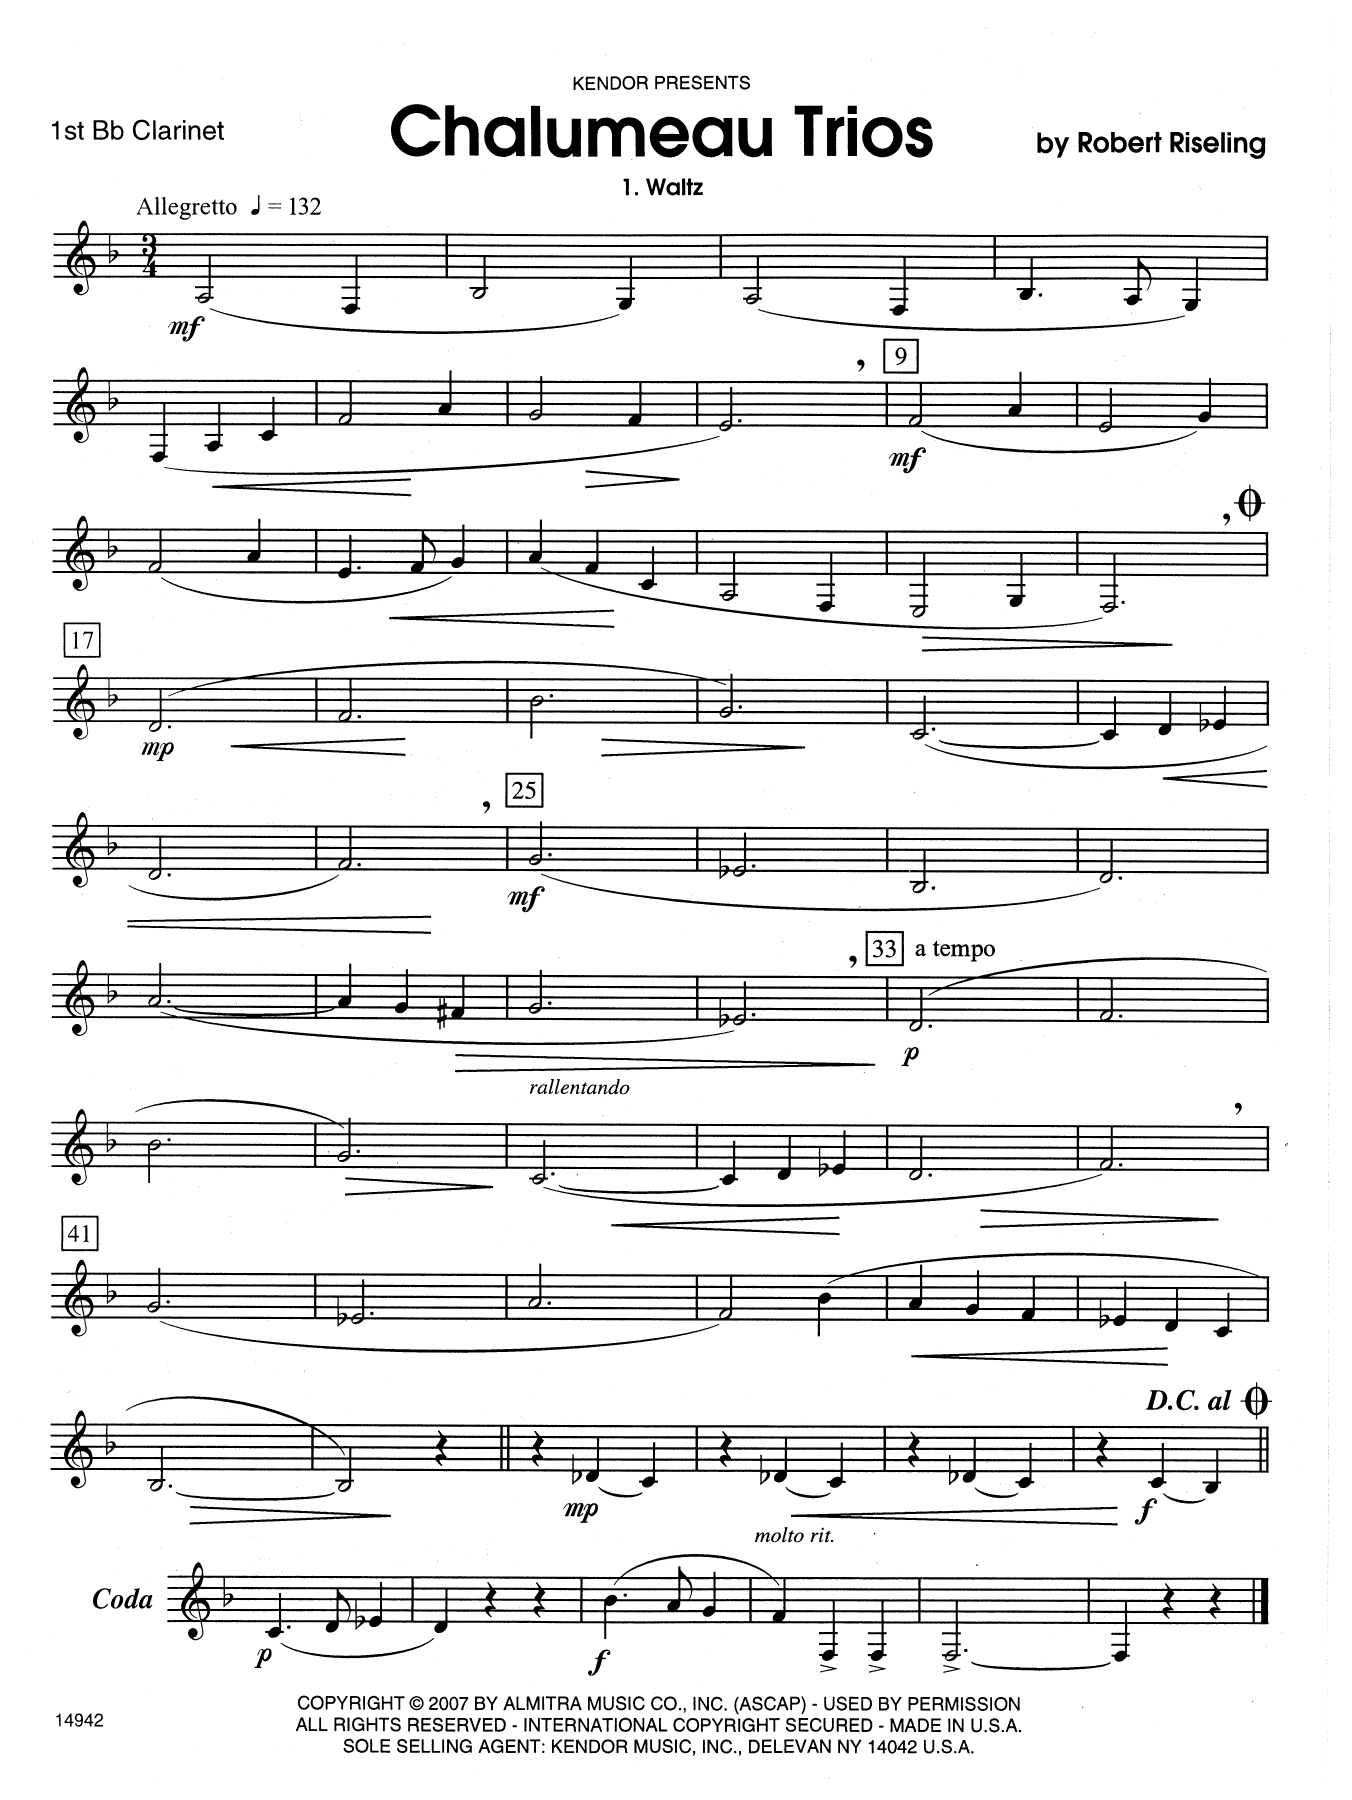 Download Riseling Chalumeau Trios - 1st Bb Clarinet Sheet Music